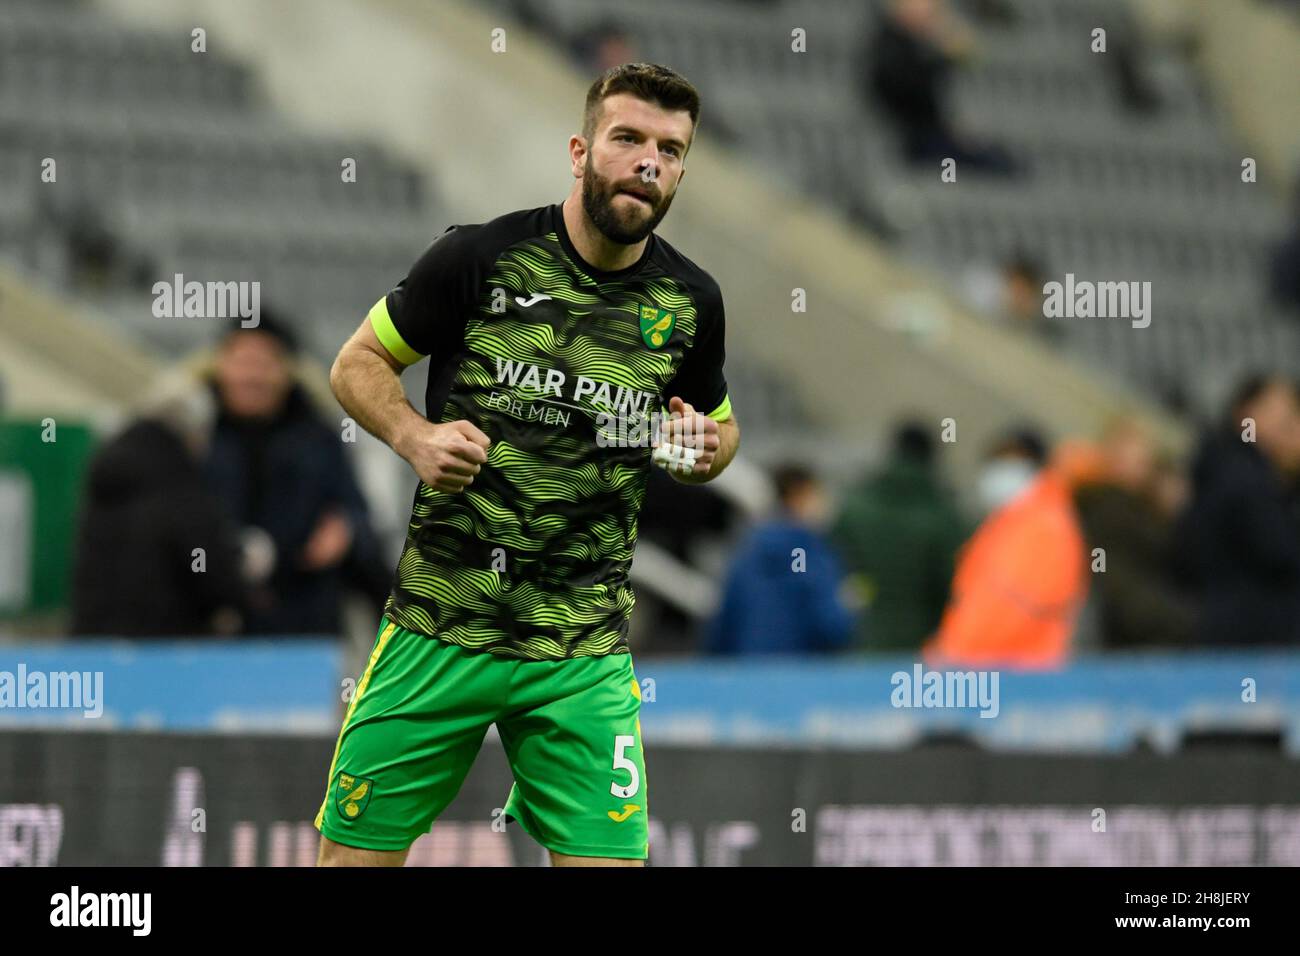 Grant Hanley #5 of Norwich City warming up before the game Stock Photo